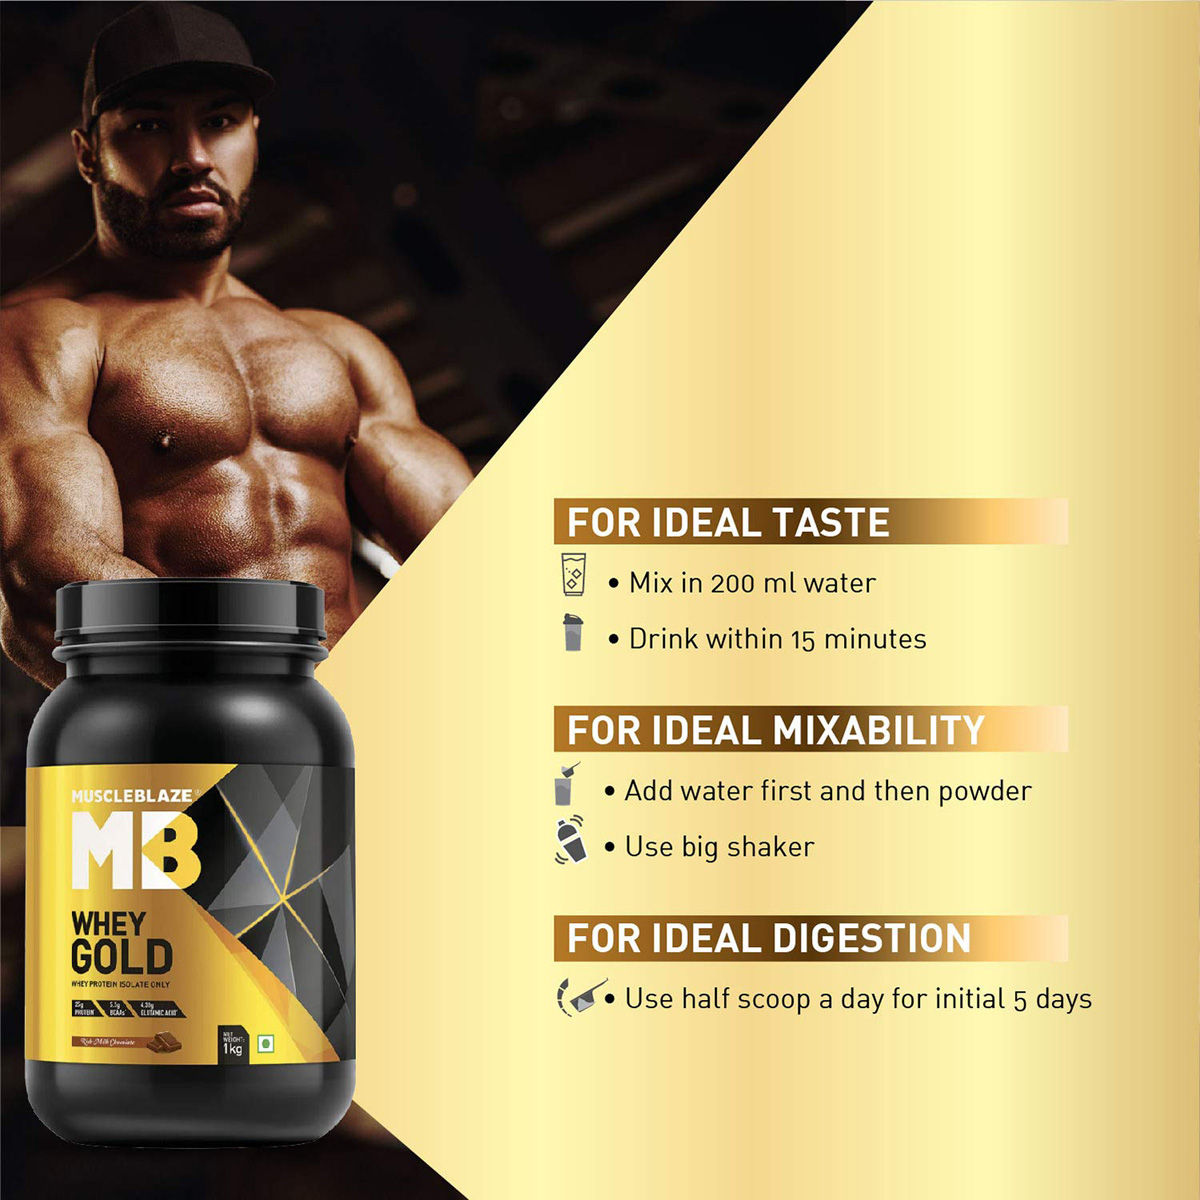 MuscleBlaze Whey Gold Rich Milk Chocolate Flavour Powder, 1 kg, Pack of 1 